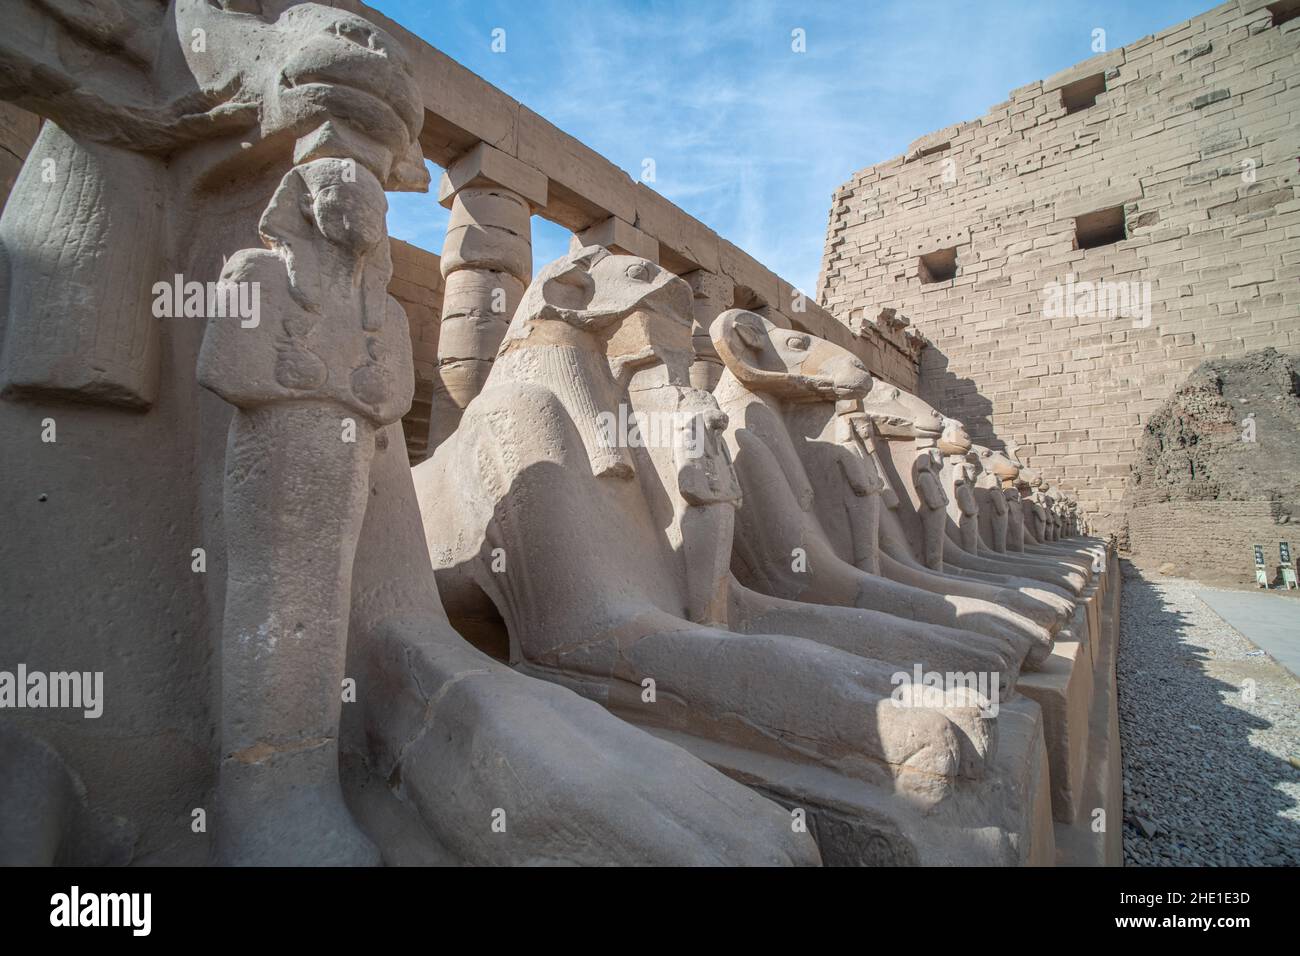 Sphinxes with heads of Rams at Karnak temple an Egyptian archeological site located in Luxor, Egypt. Stock Photo